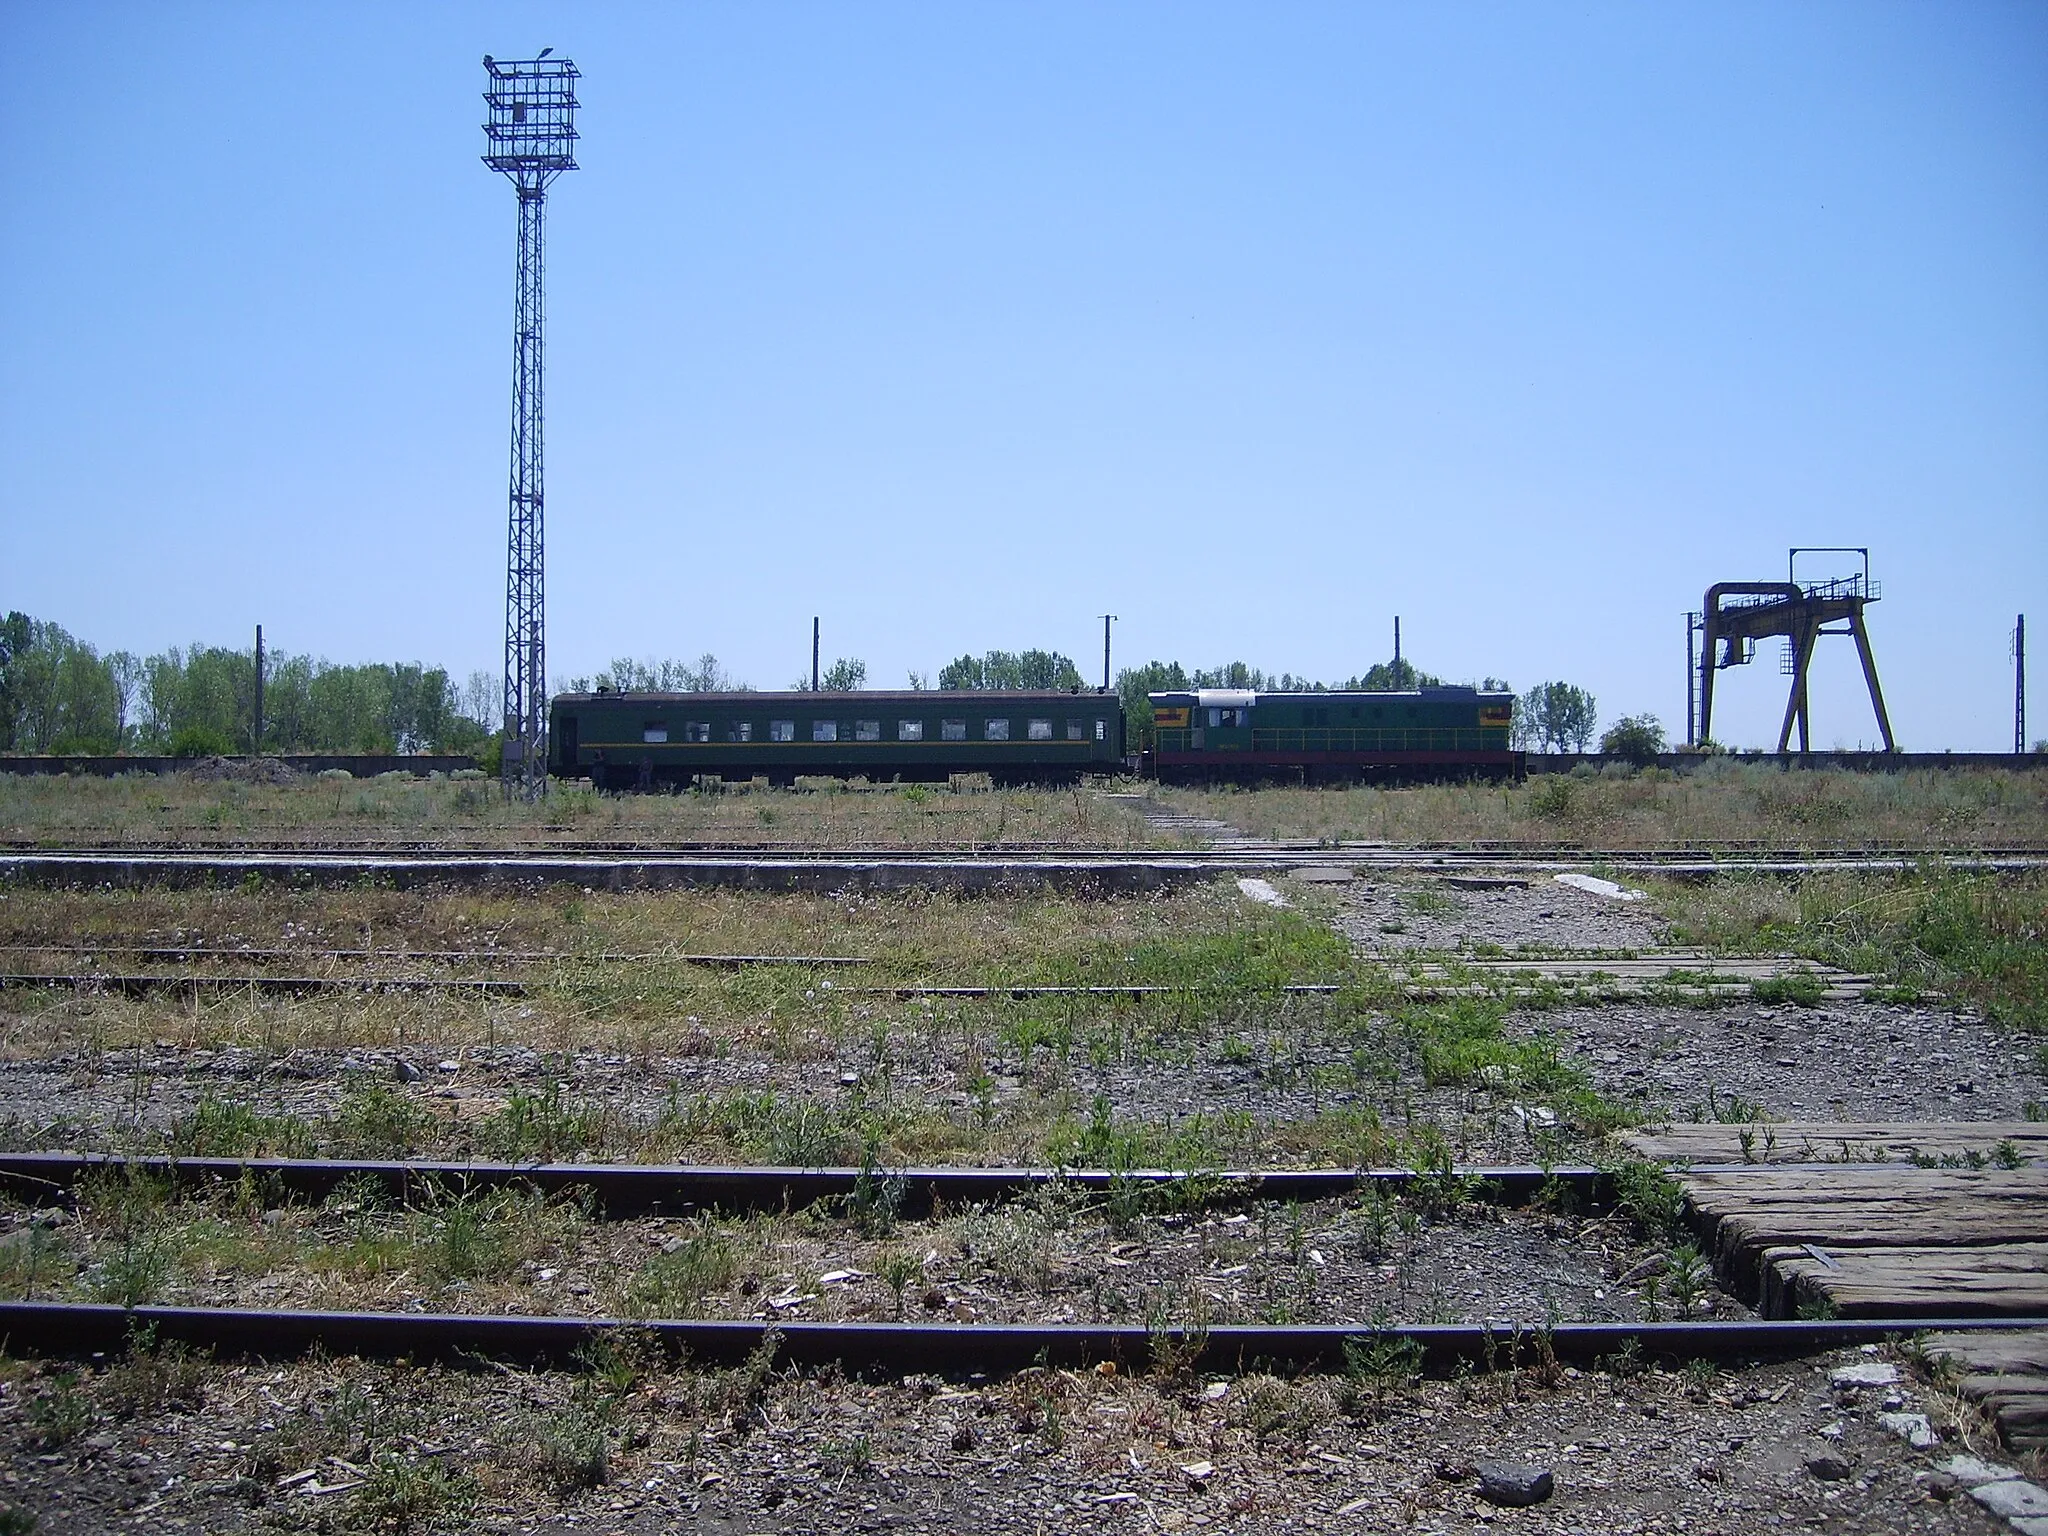 Photo showing: Train station in Fălciu, Vaslui, Romania. A former busy border crossing with the USSR (change of gauge); at time of our visit, it was largely empty, with most technology disfunctional. The passenger train in the back belongs to Moldovan railways and runs several times a week on broad-gauge rails across the border to Prut, Moldova.